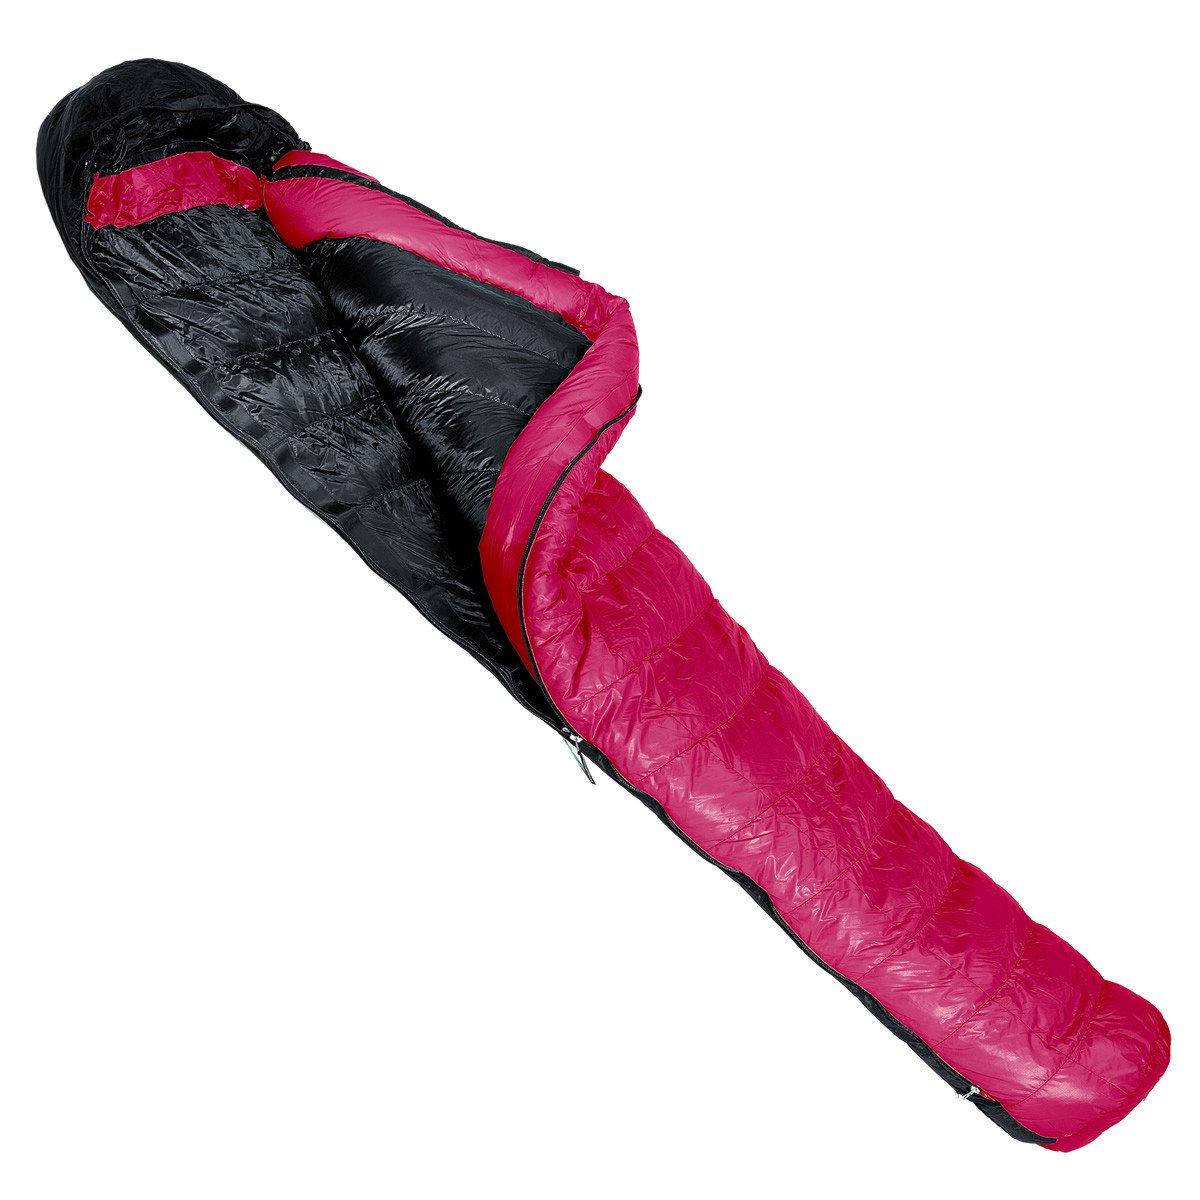 Western Mountaineering Alpinlite down sleeping bag, shown partially opened in pink with black lining